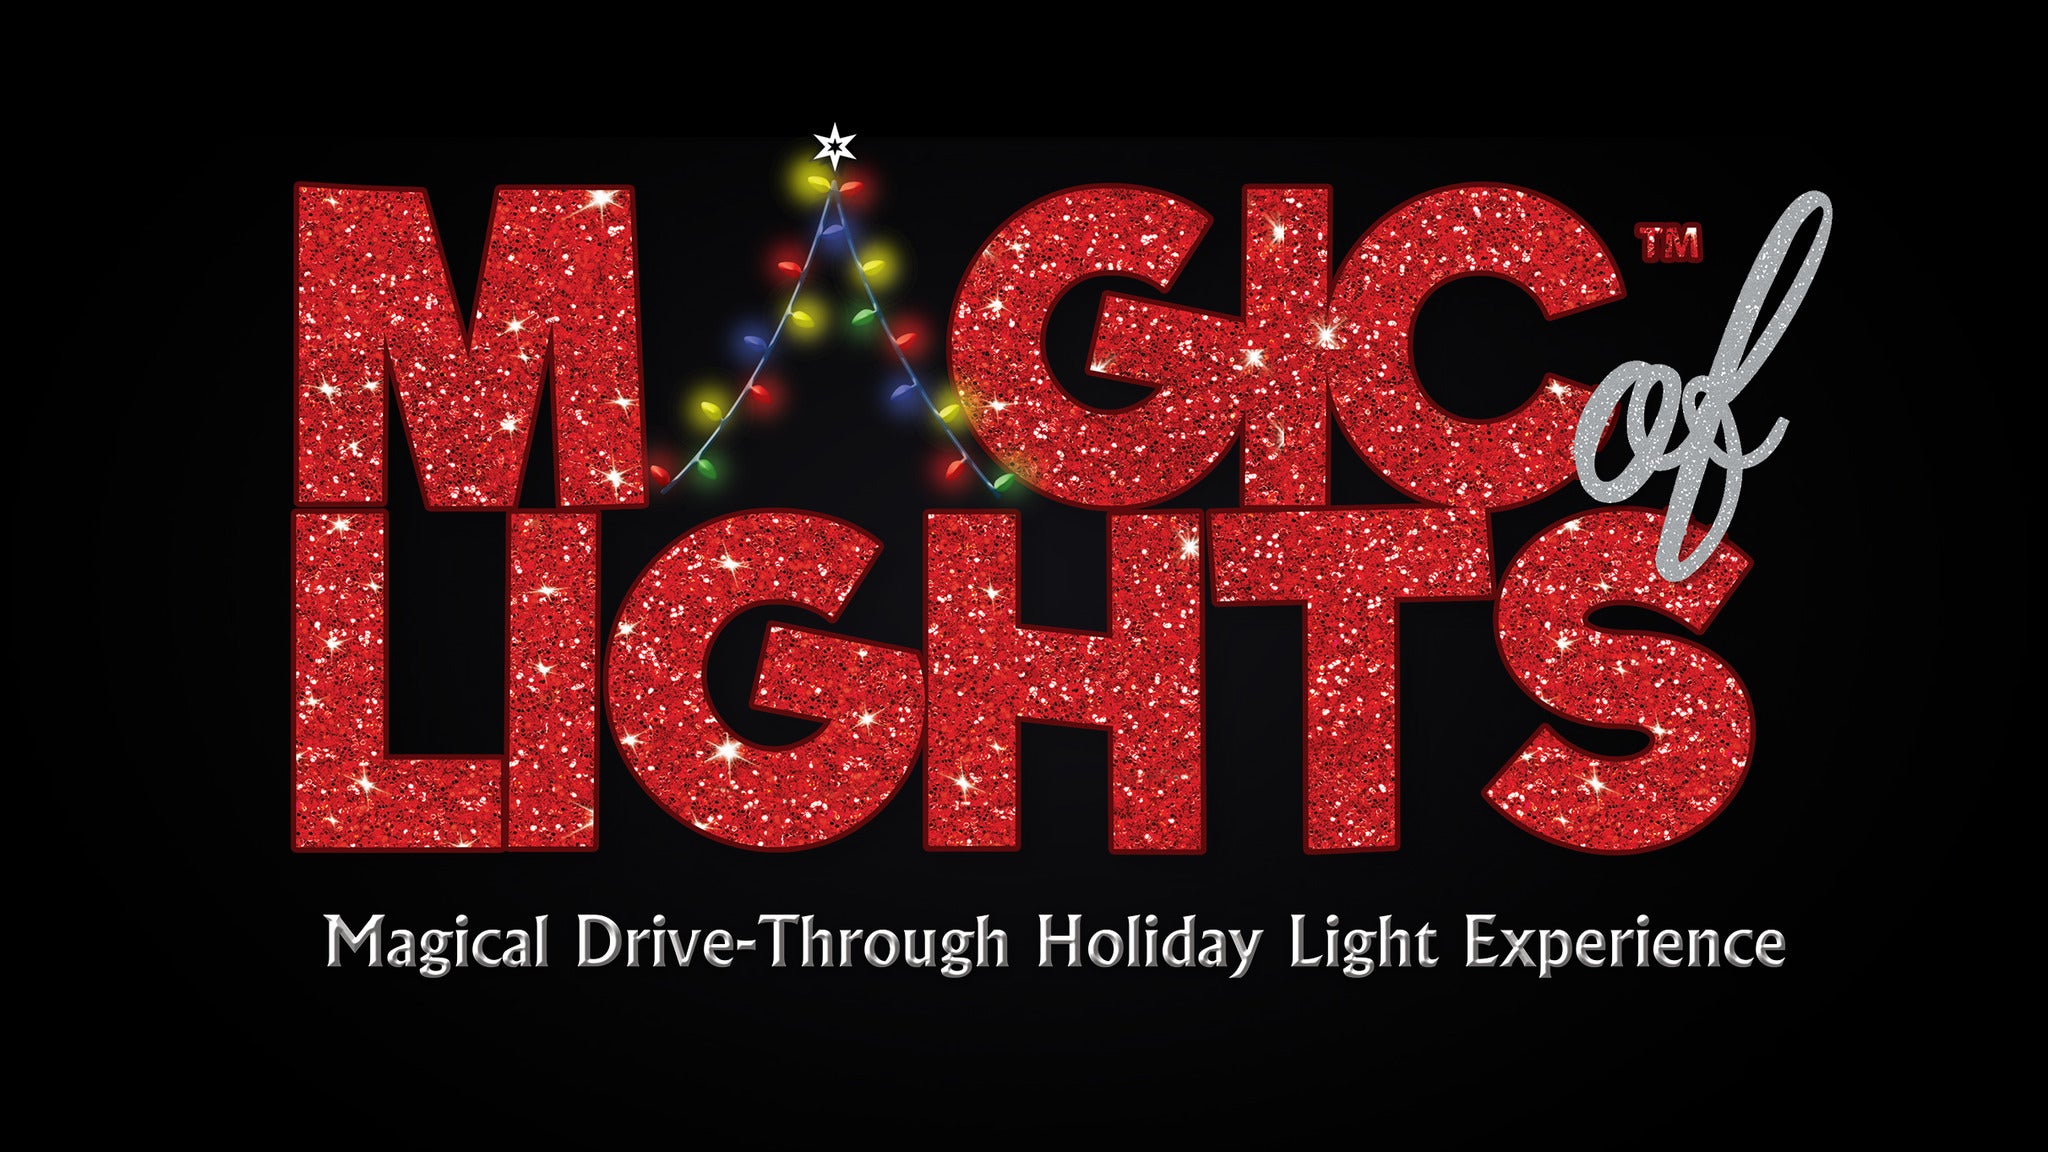 Magic Of Lights in Raleigh event information